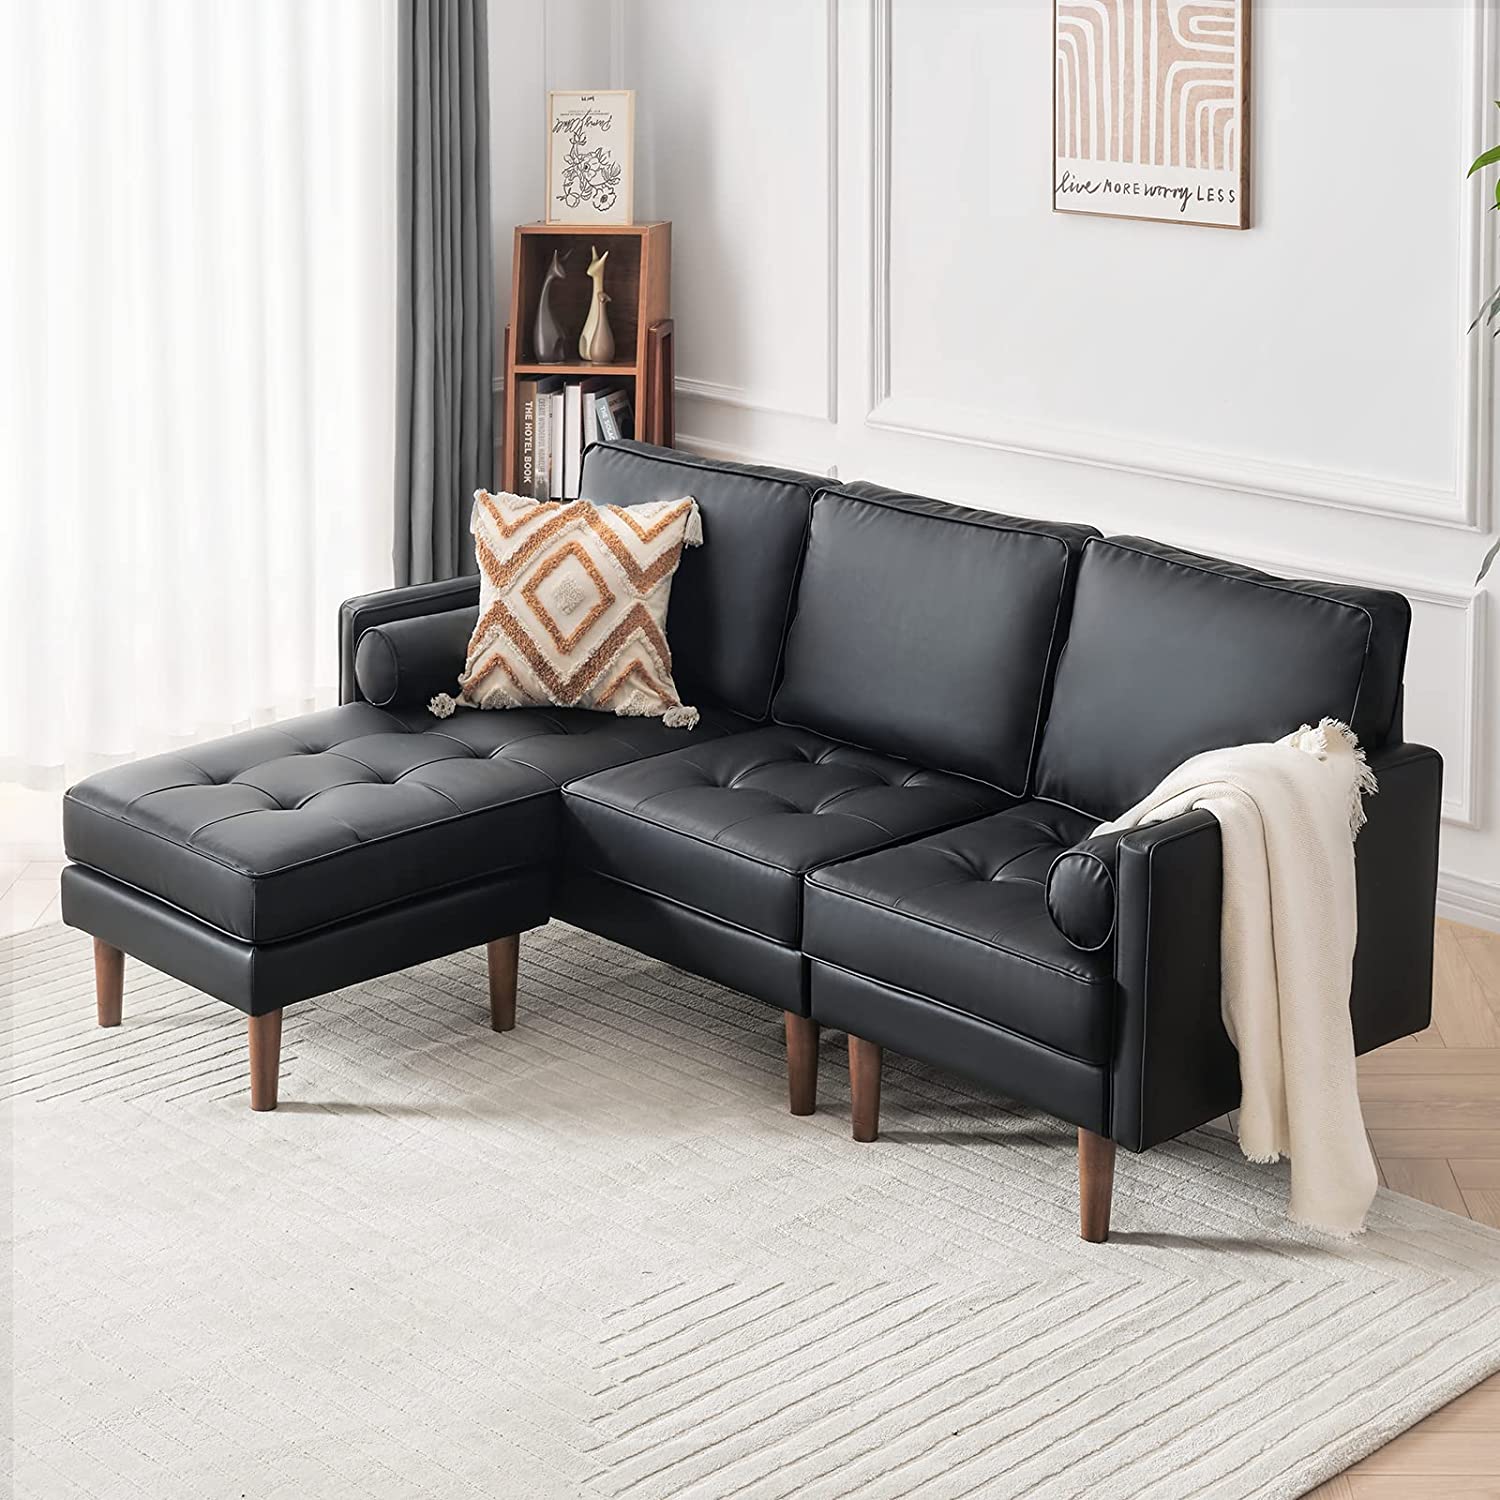 Mora Sofa Couch, Sectional Sofa Faux Leather Couch for Living Room and Small Space, L Shaped Couch with Reversible Chaise and Tufted Seat Cushion, Black